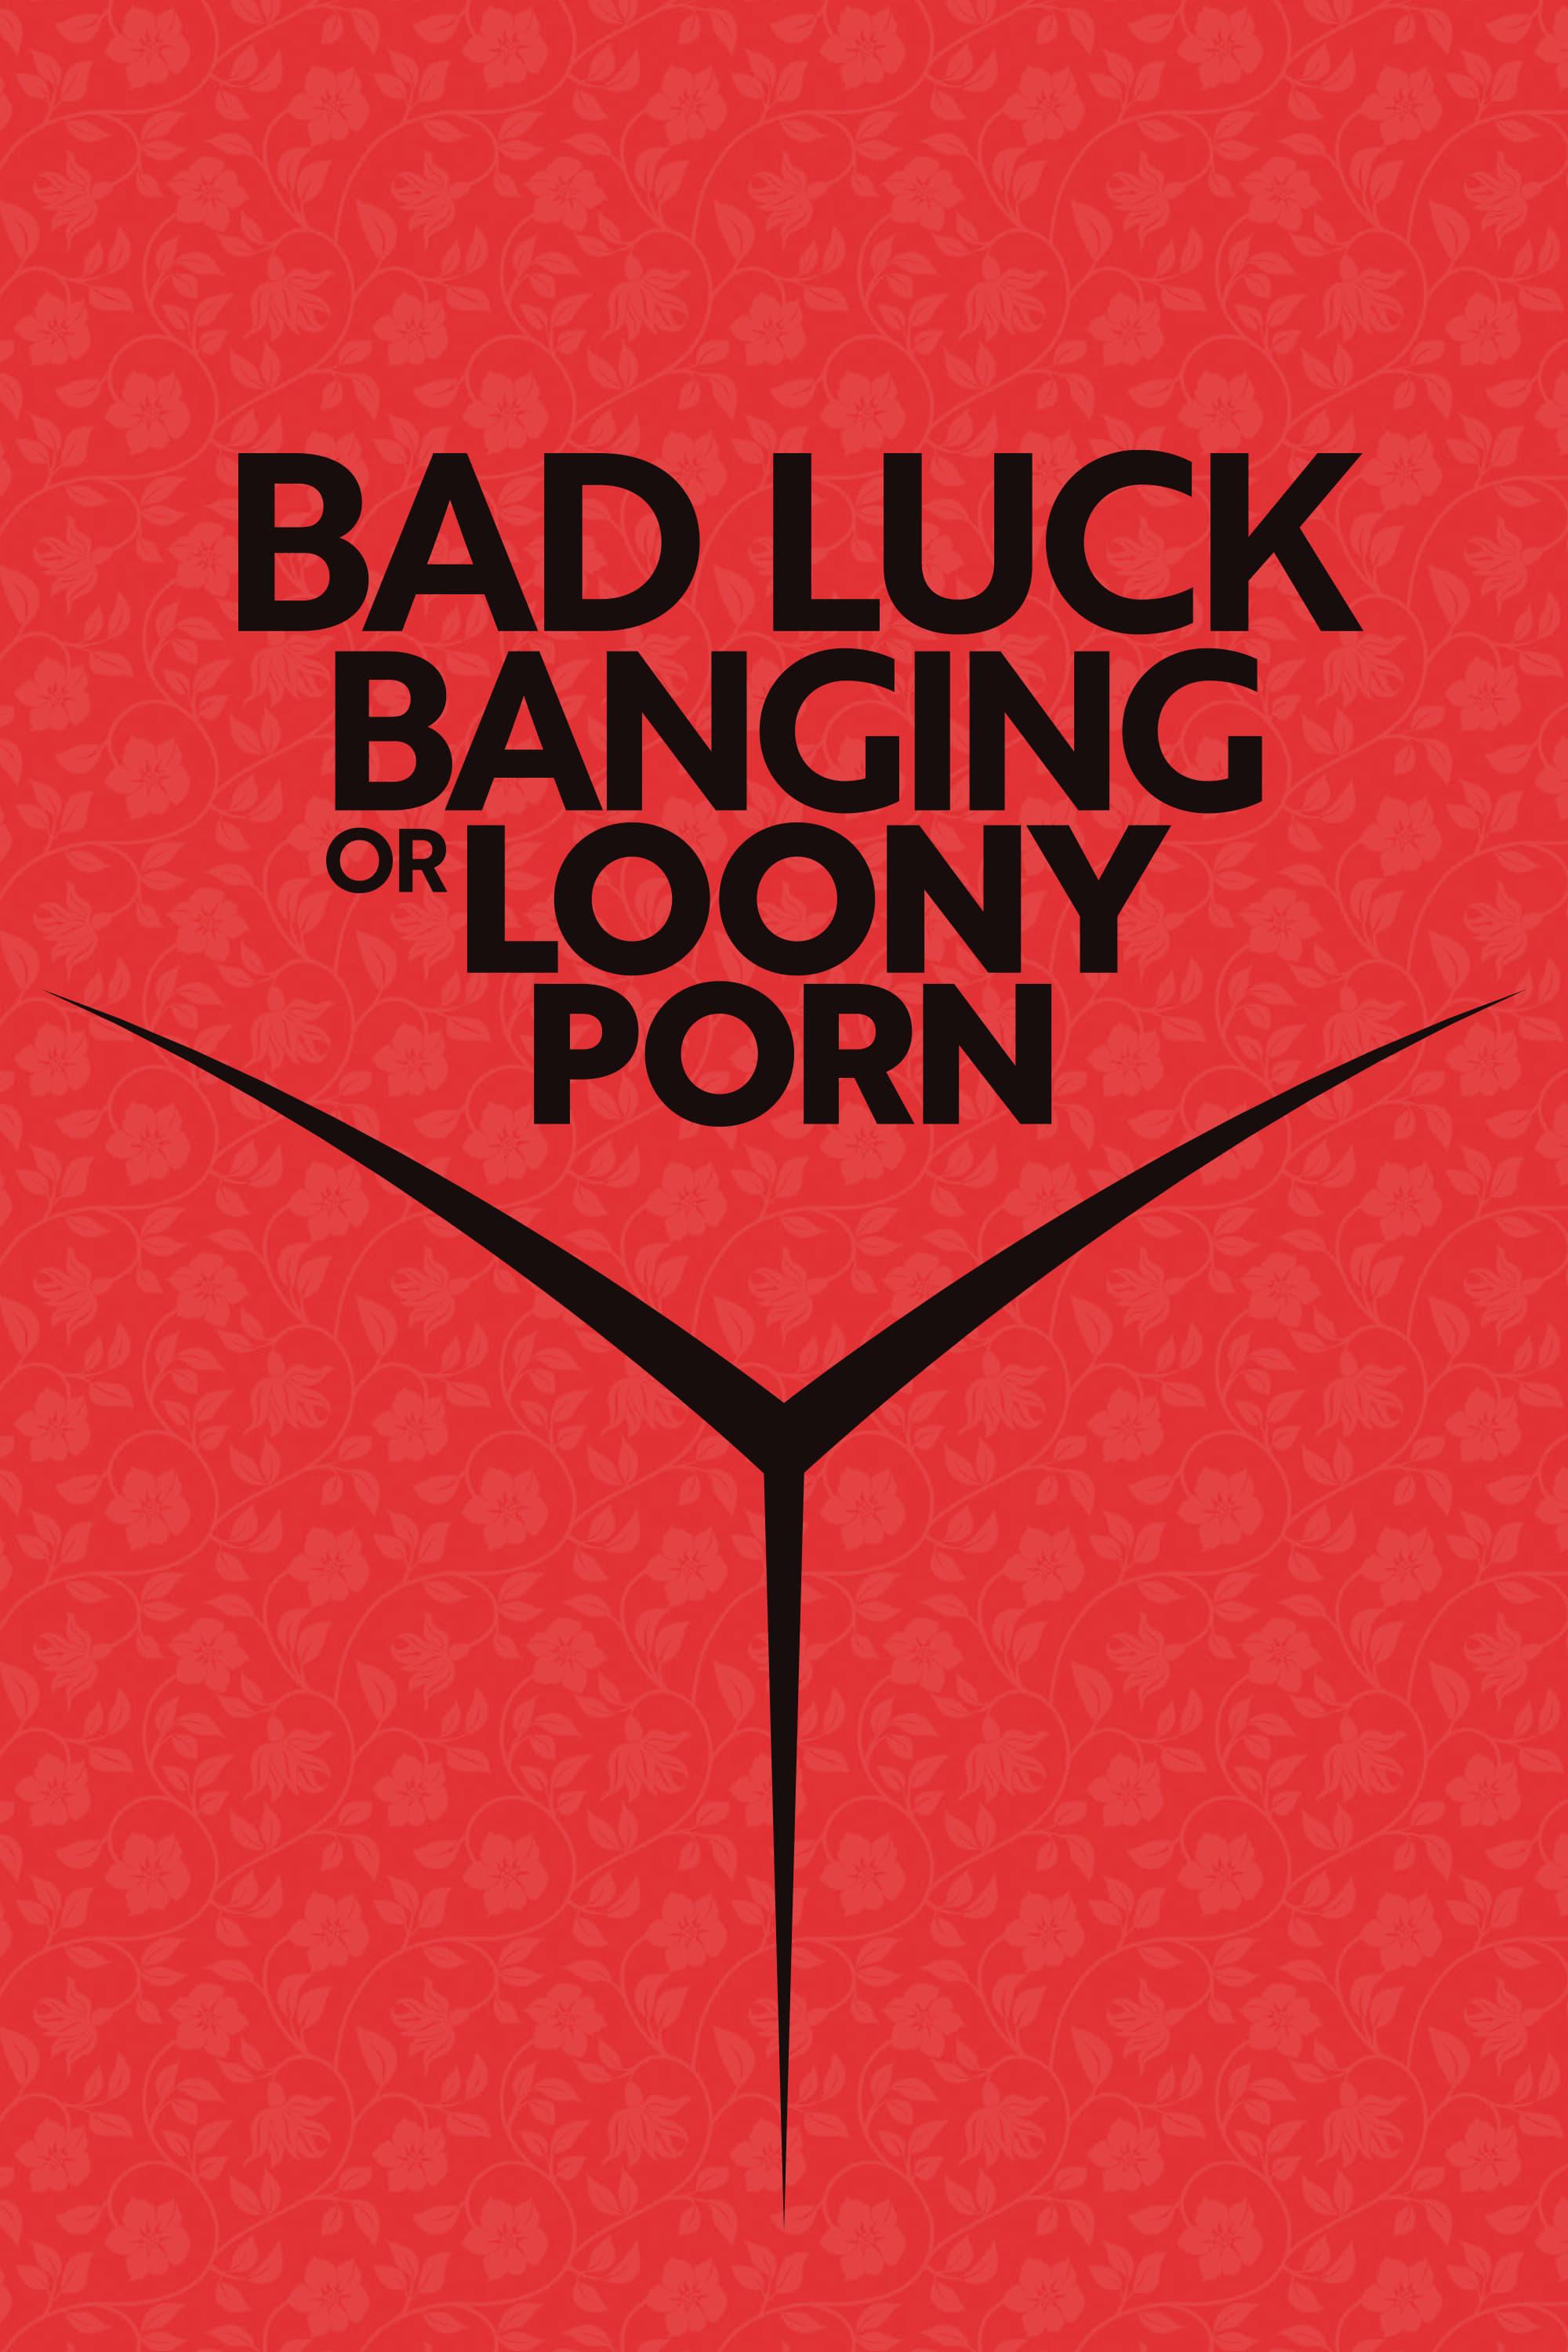 Bad Luck Banging or Loony Porn poster